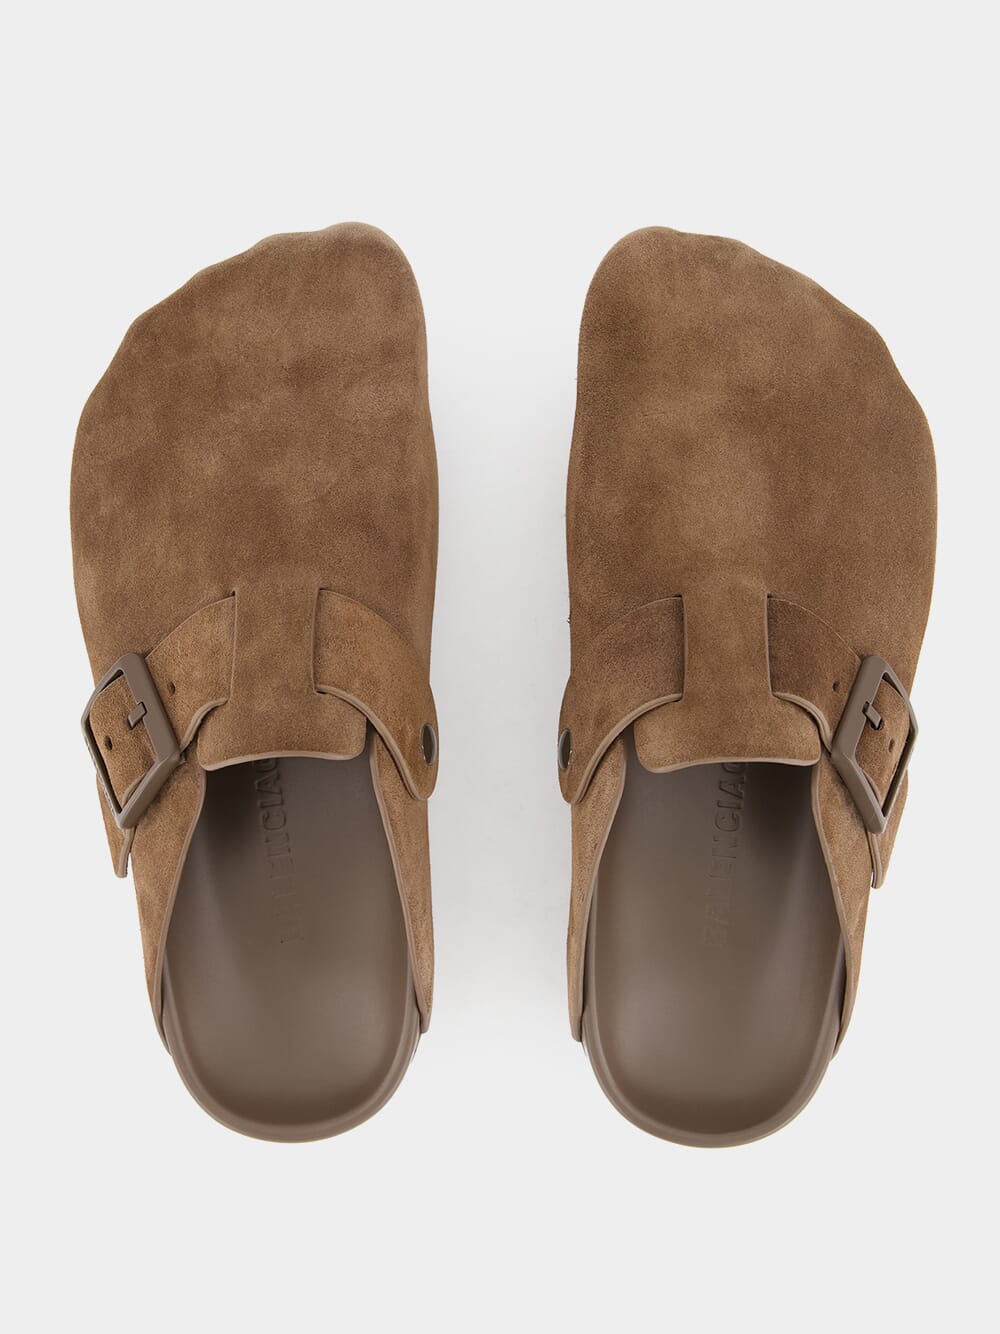 Light Brown Suede Mules